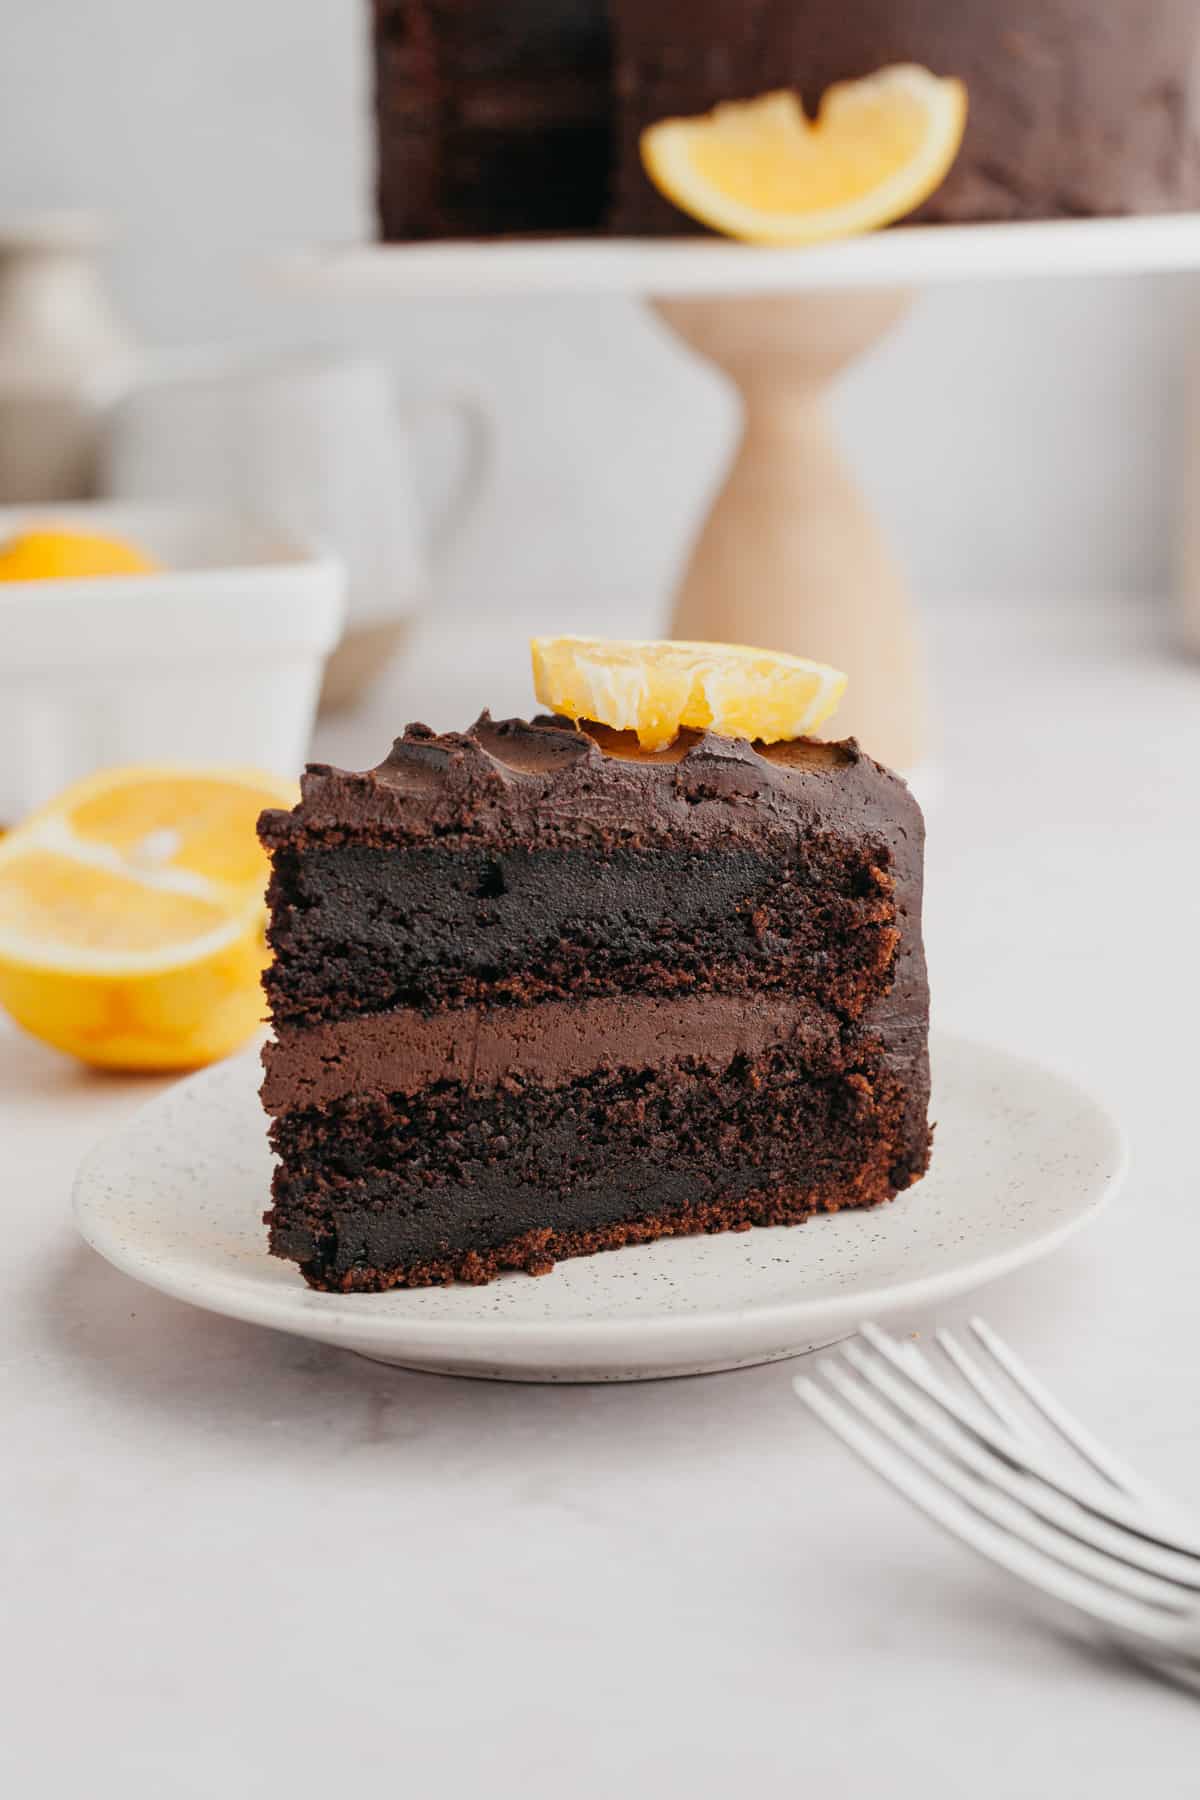 A slice of chocolate cake on a small plate.